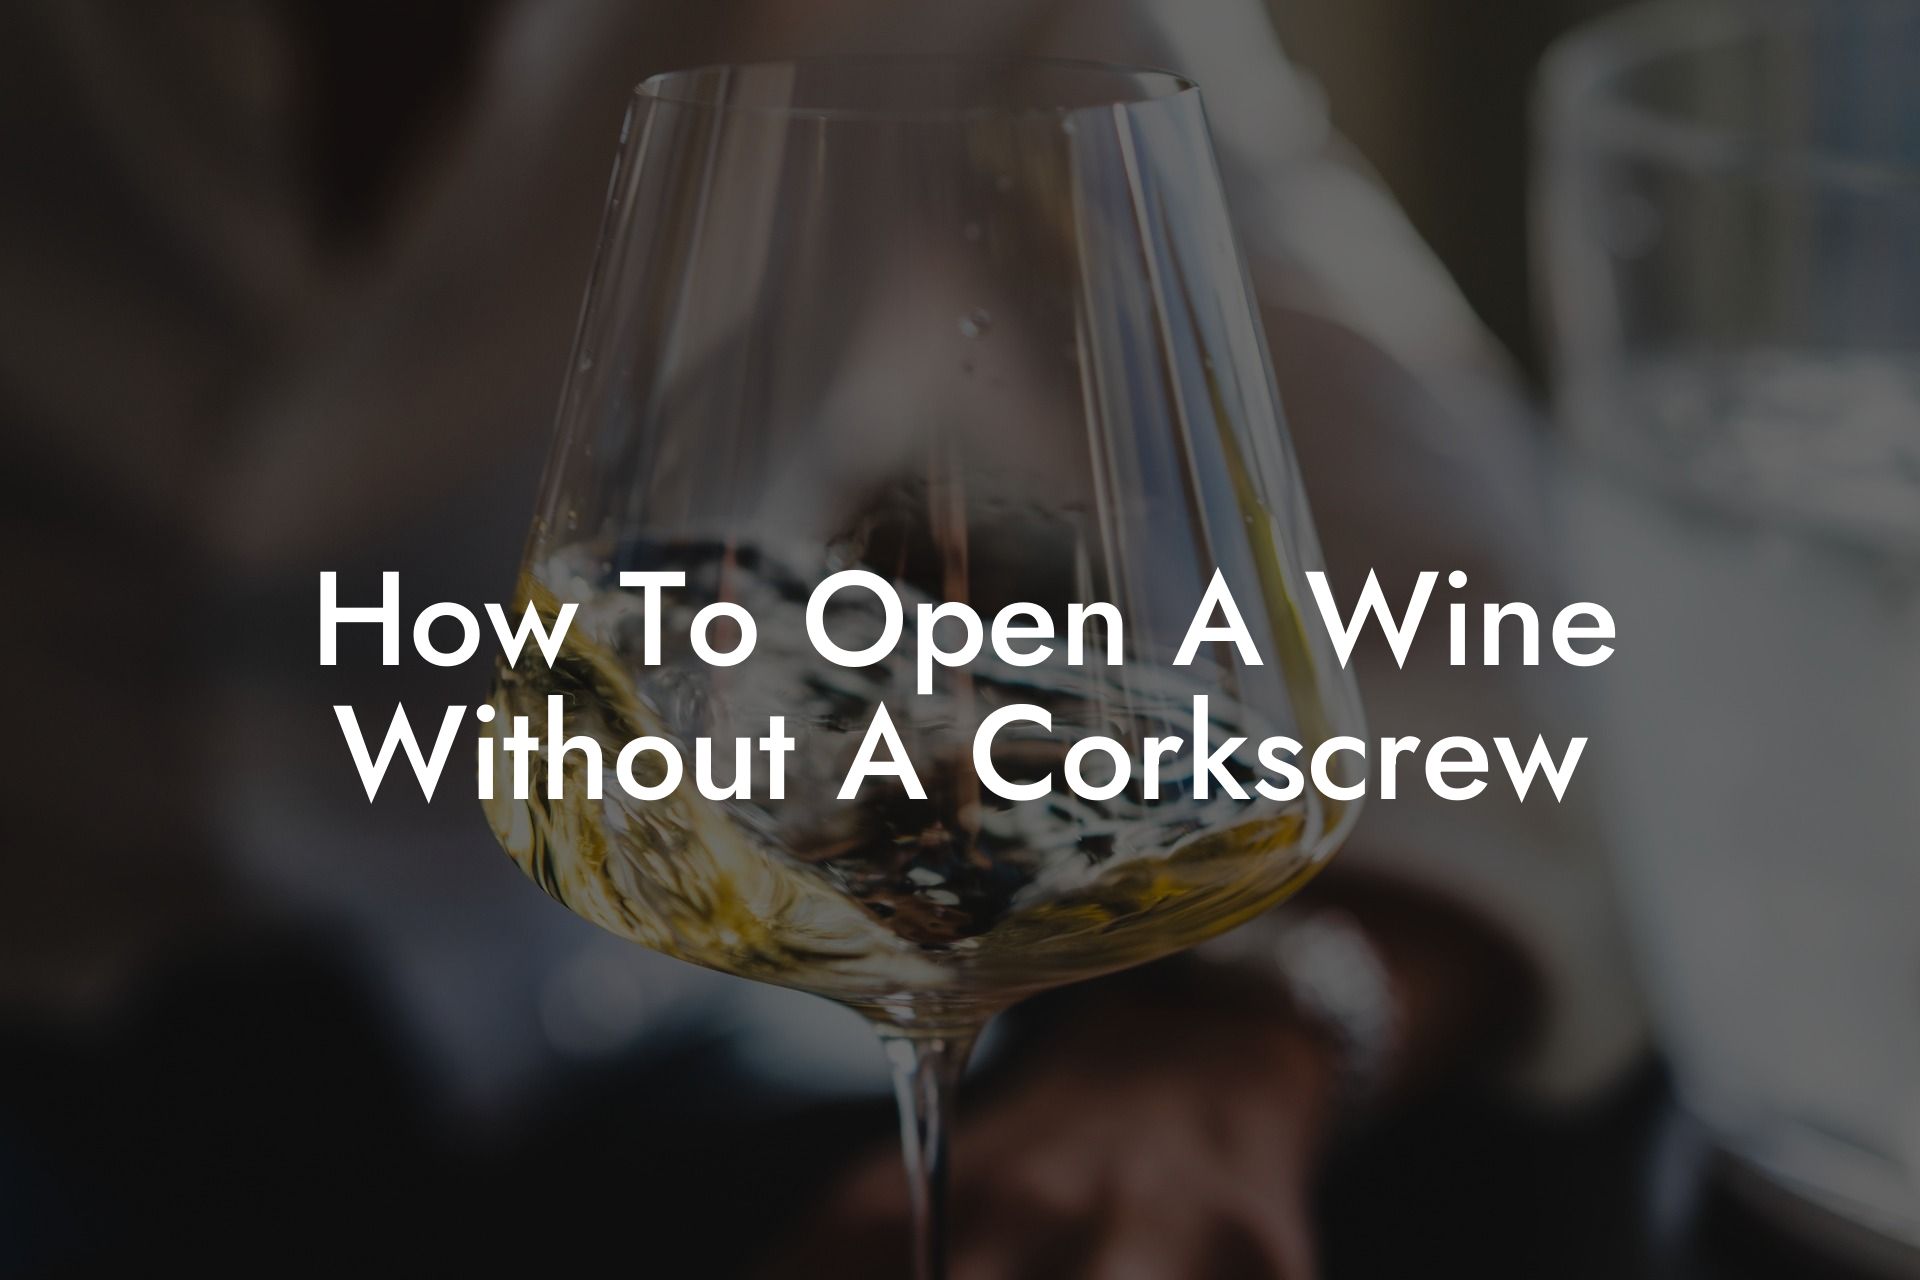 How To Open A Wine Without A Corkscrew